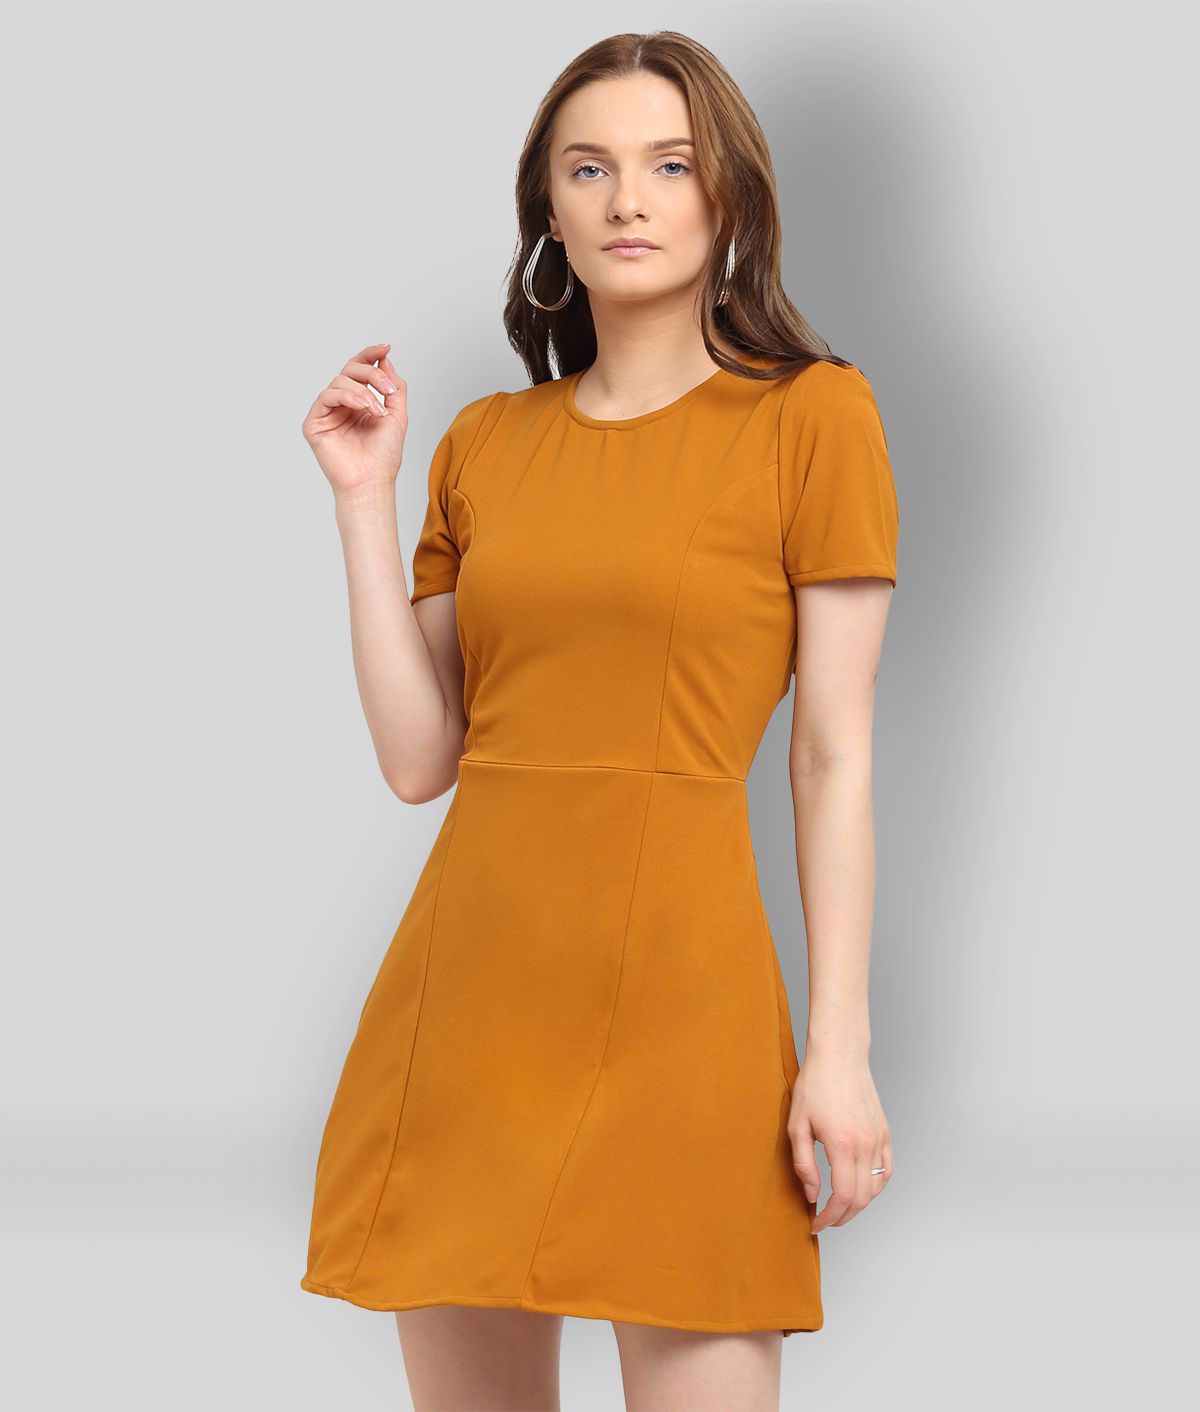 La Zoire - Yellow Polyester Women's Fit & Flare Dress ( Pack of 1 )